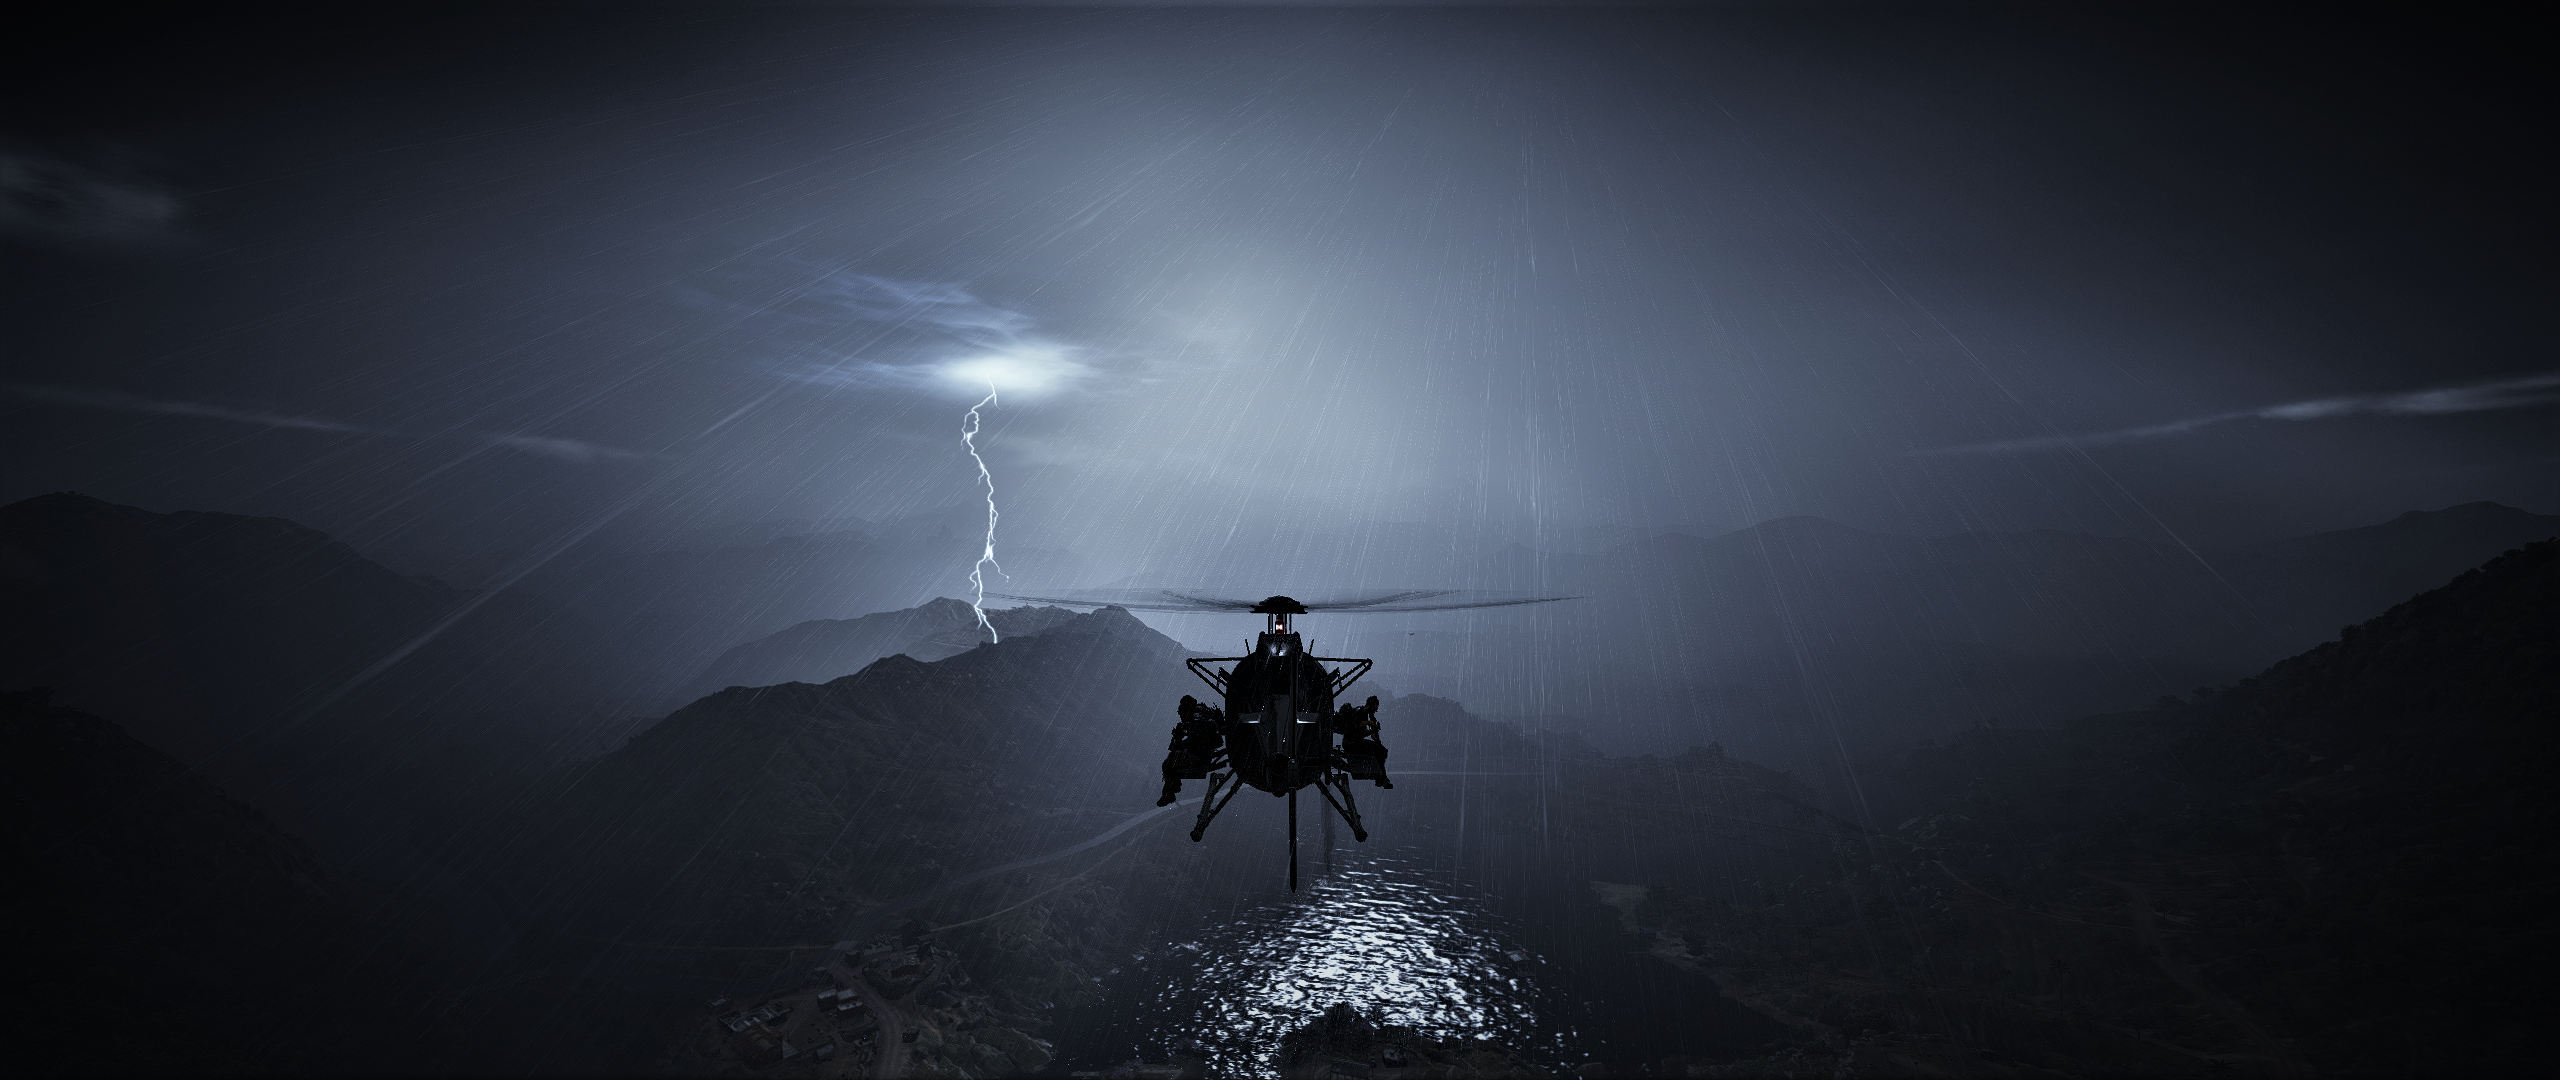 General 2560x1080 Tom Clancy's Ghost Recon: Wildlands screen shot AMD ultrawide PC gaming video game landscape vehicle helicopters lightning rain